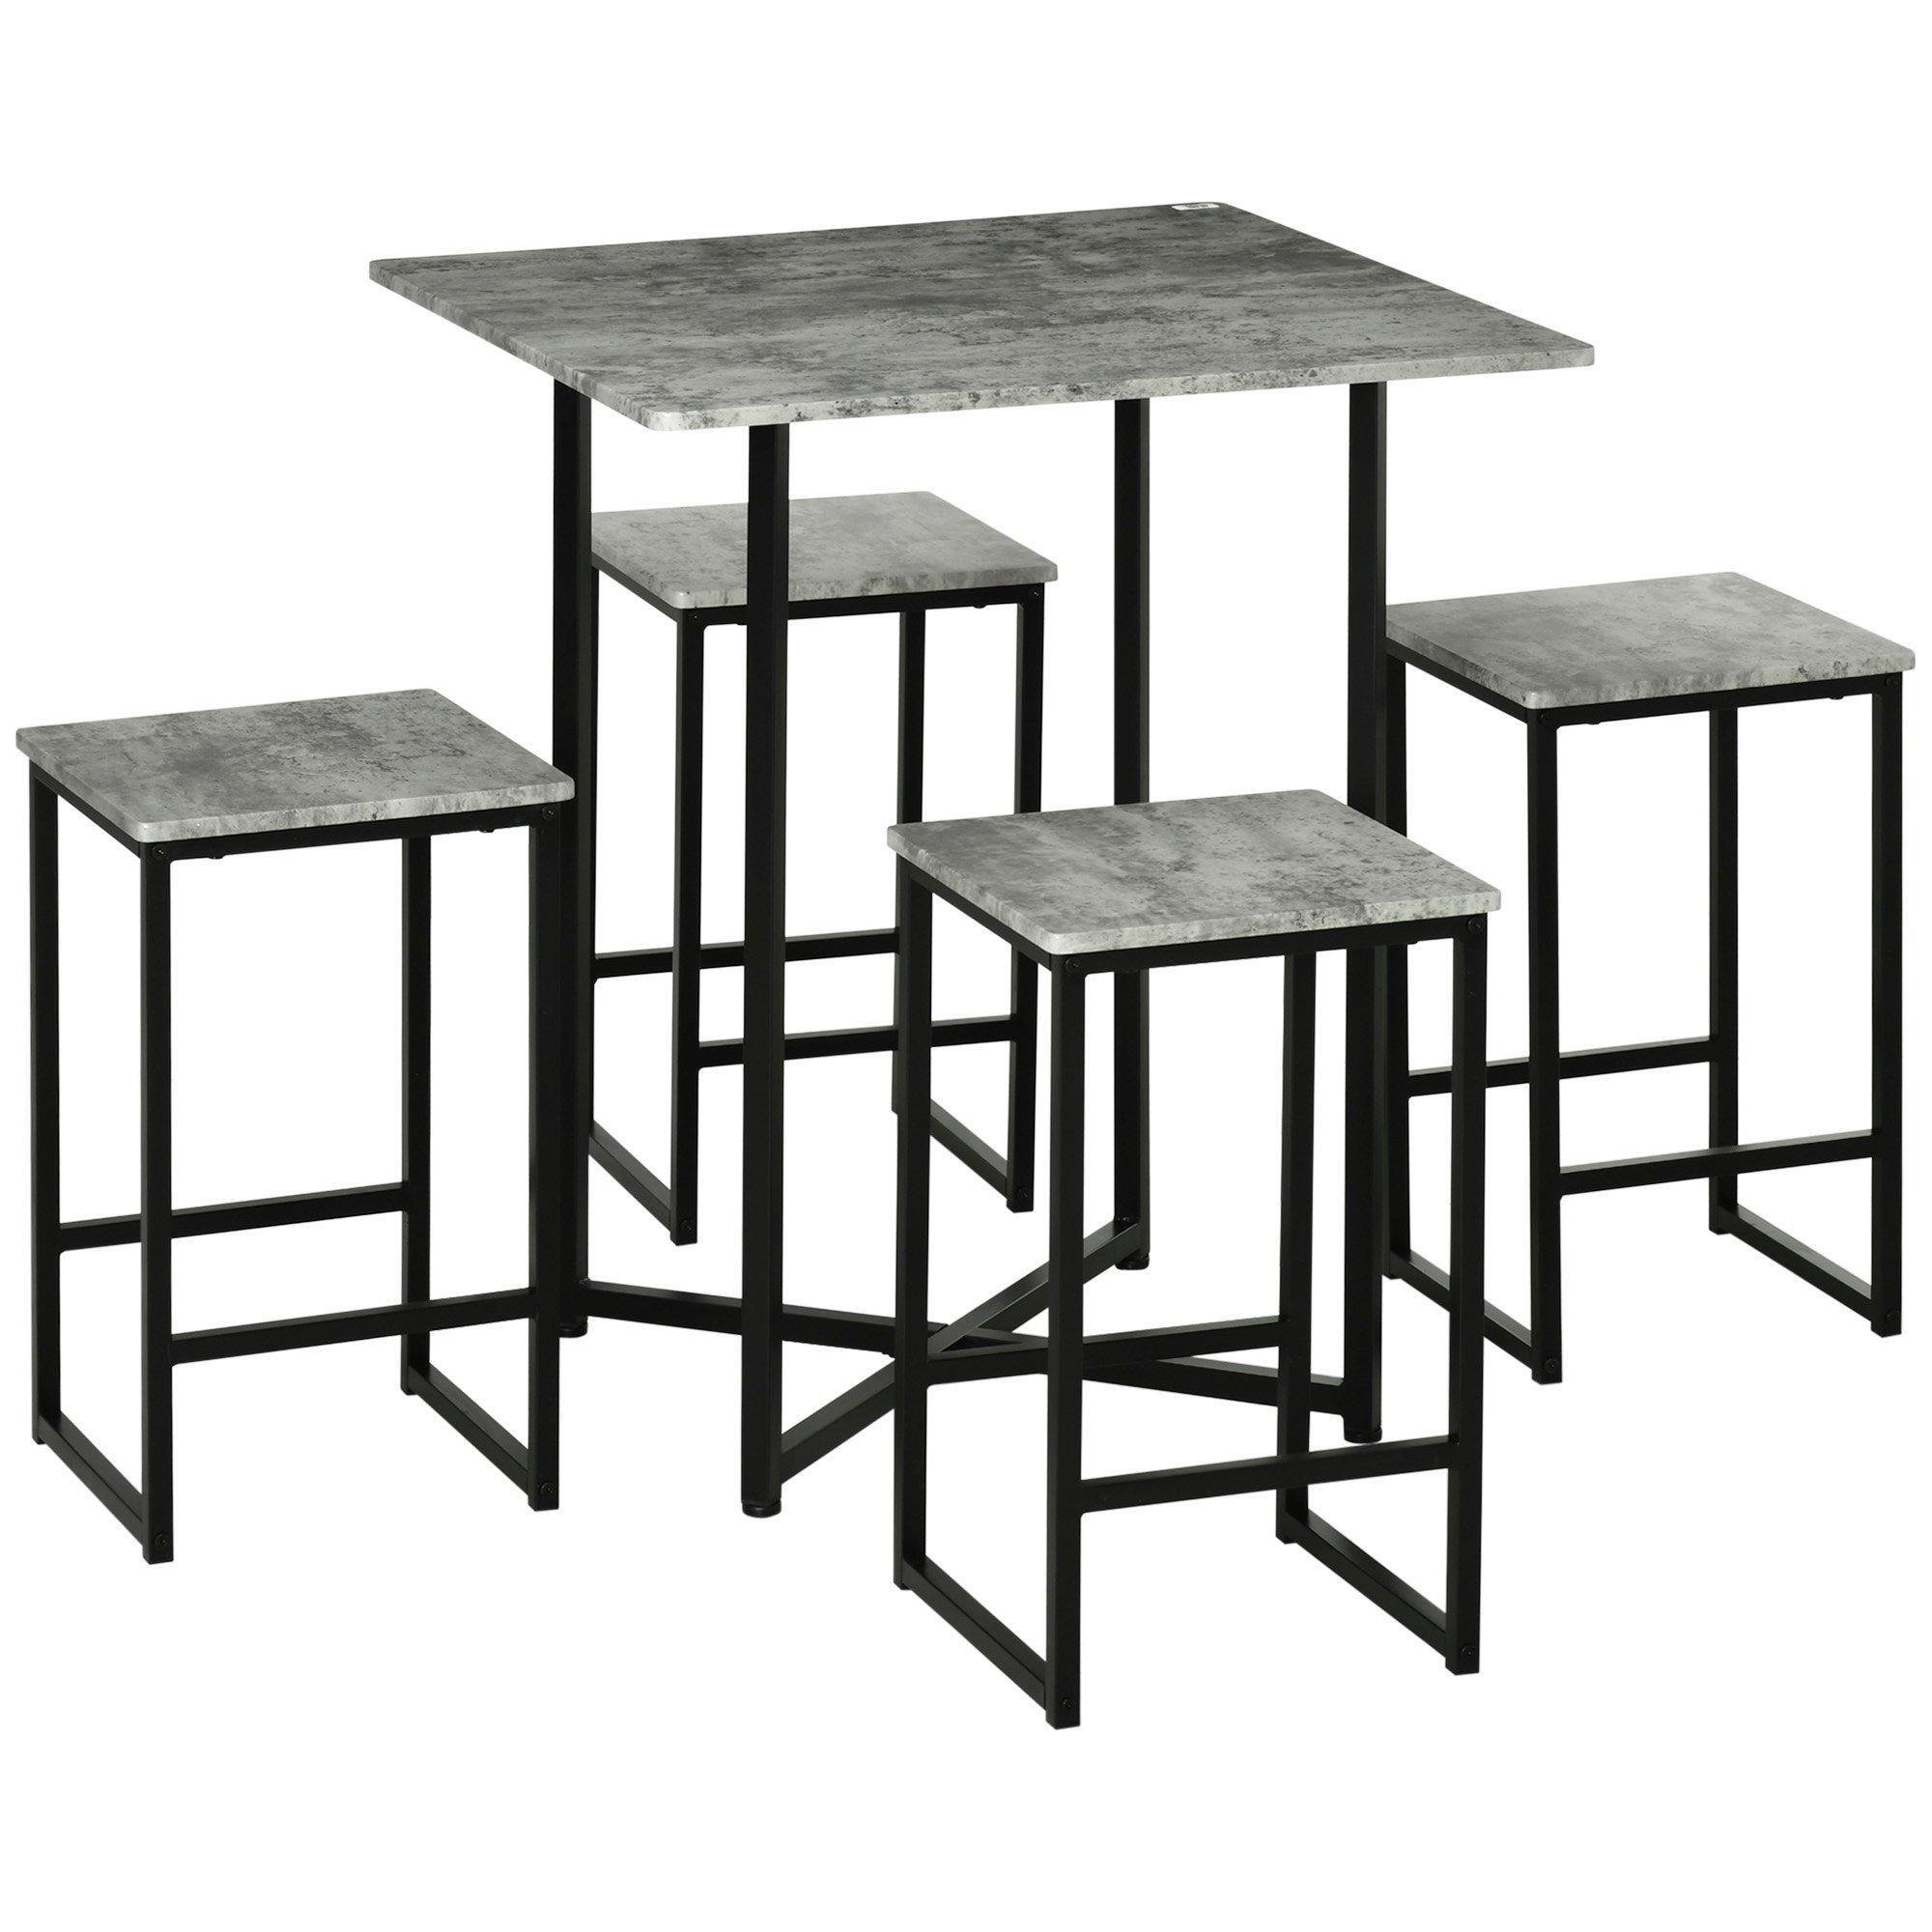 Square Bar Table with Stools Concrete Effect Kitchen Table Set - image 1